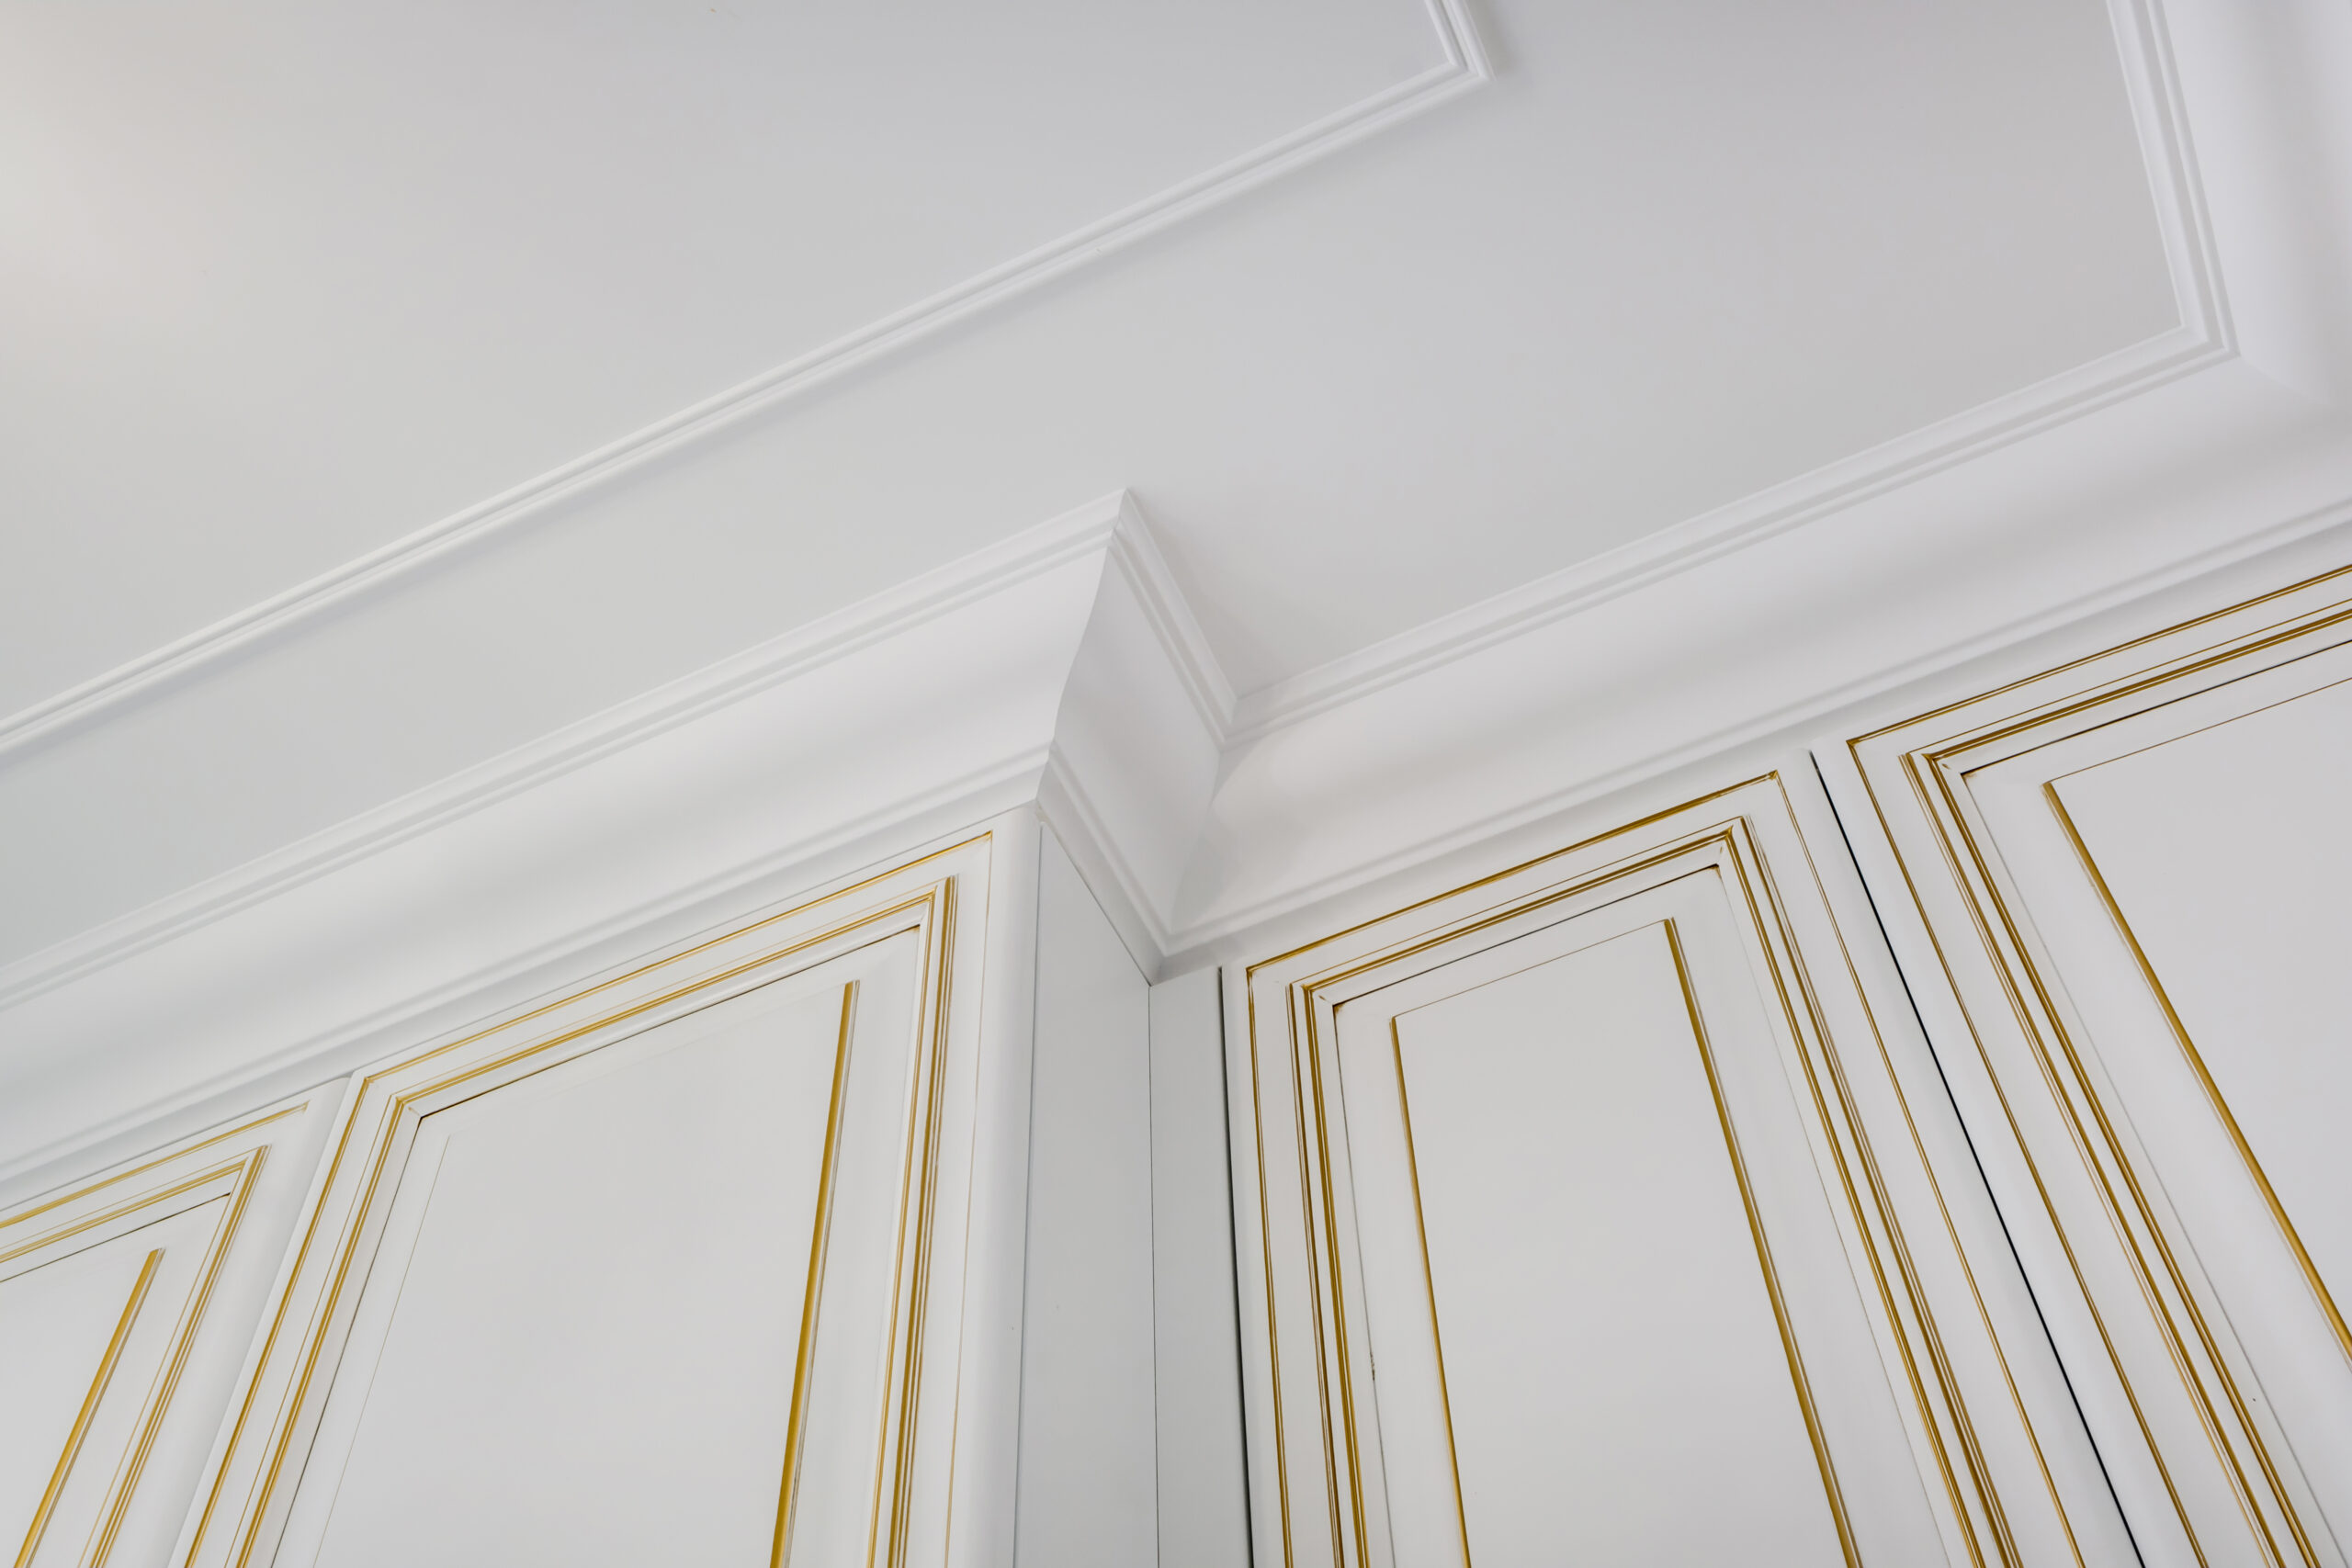 How to Install Crown Molding